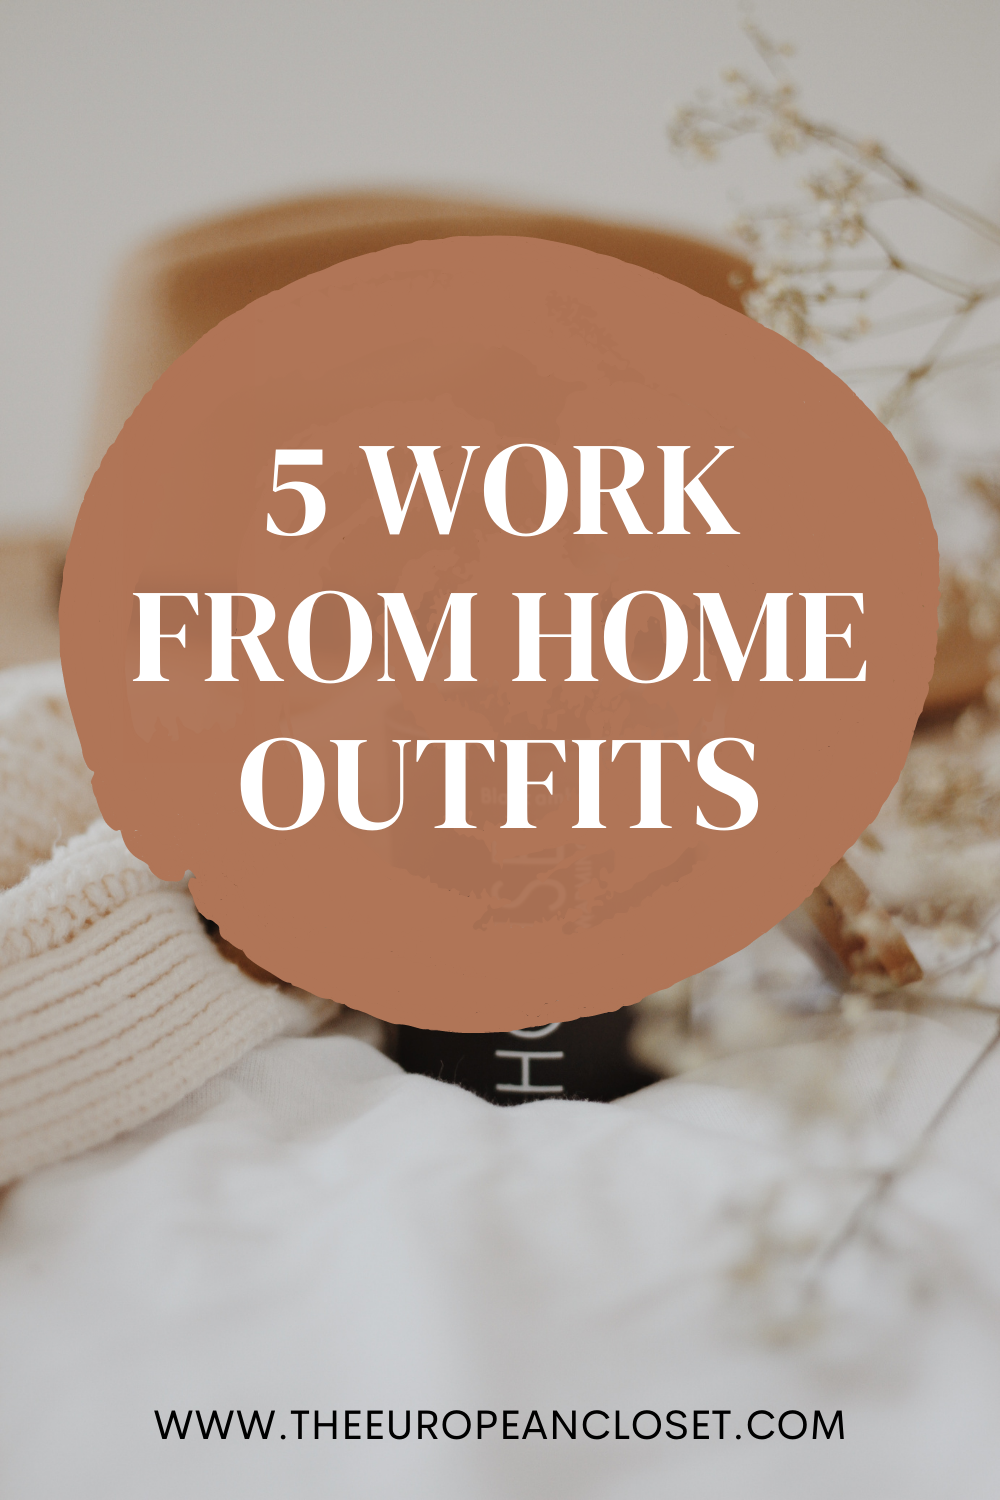 When it comes to outfits to wear while working from home, the key is to make the outfits comfortable. Here are 5 work from home outfits.